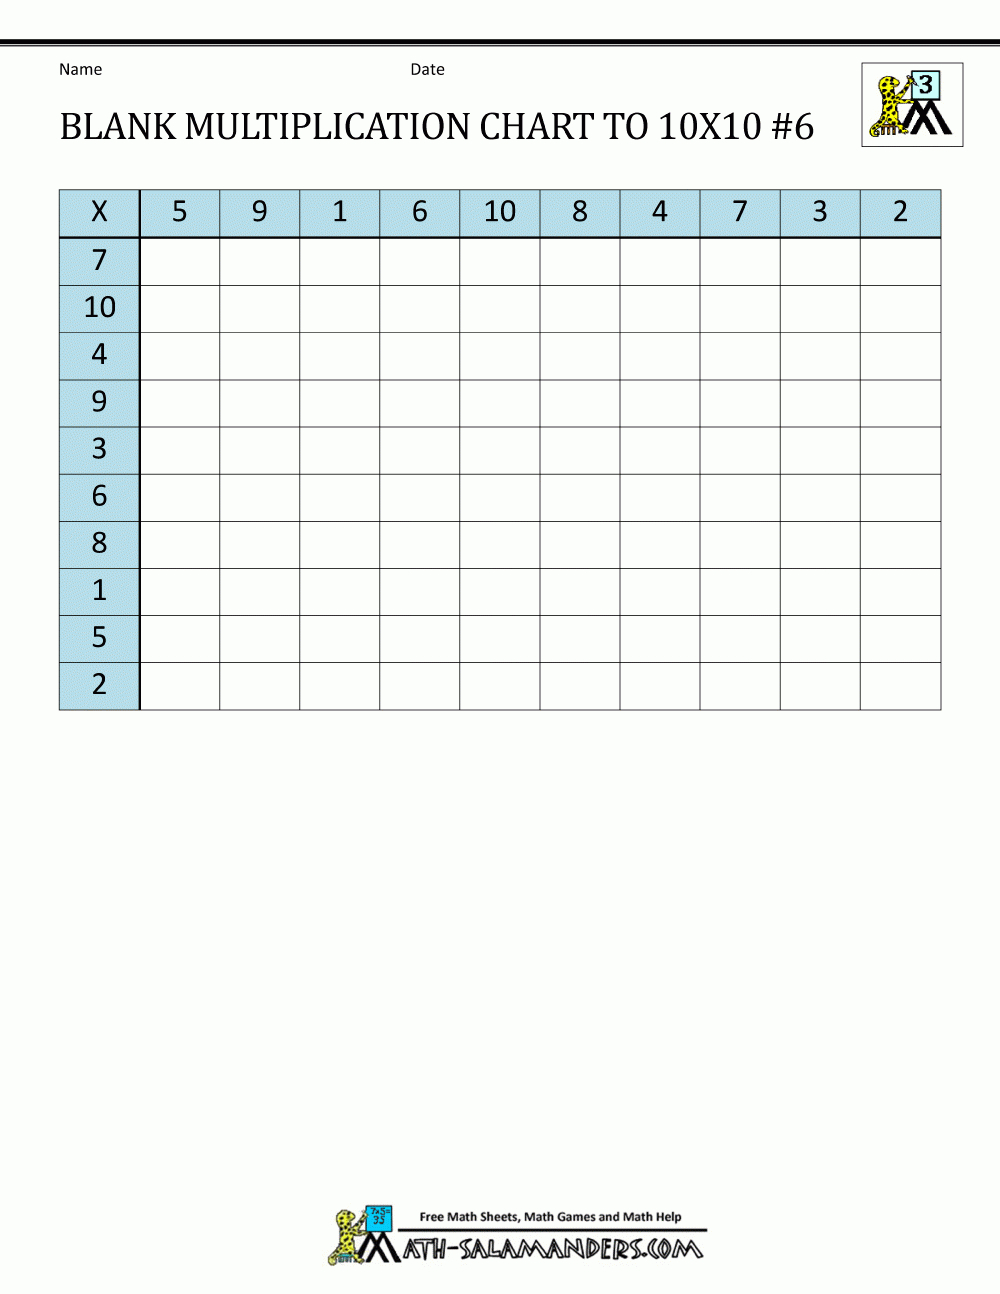 Blank Multiplication Chart Up To 10X10 within Printable Multiplication Blank Chart